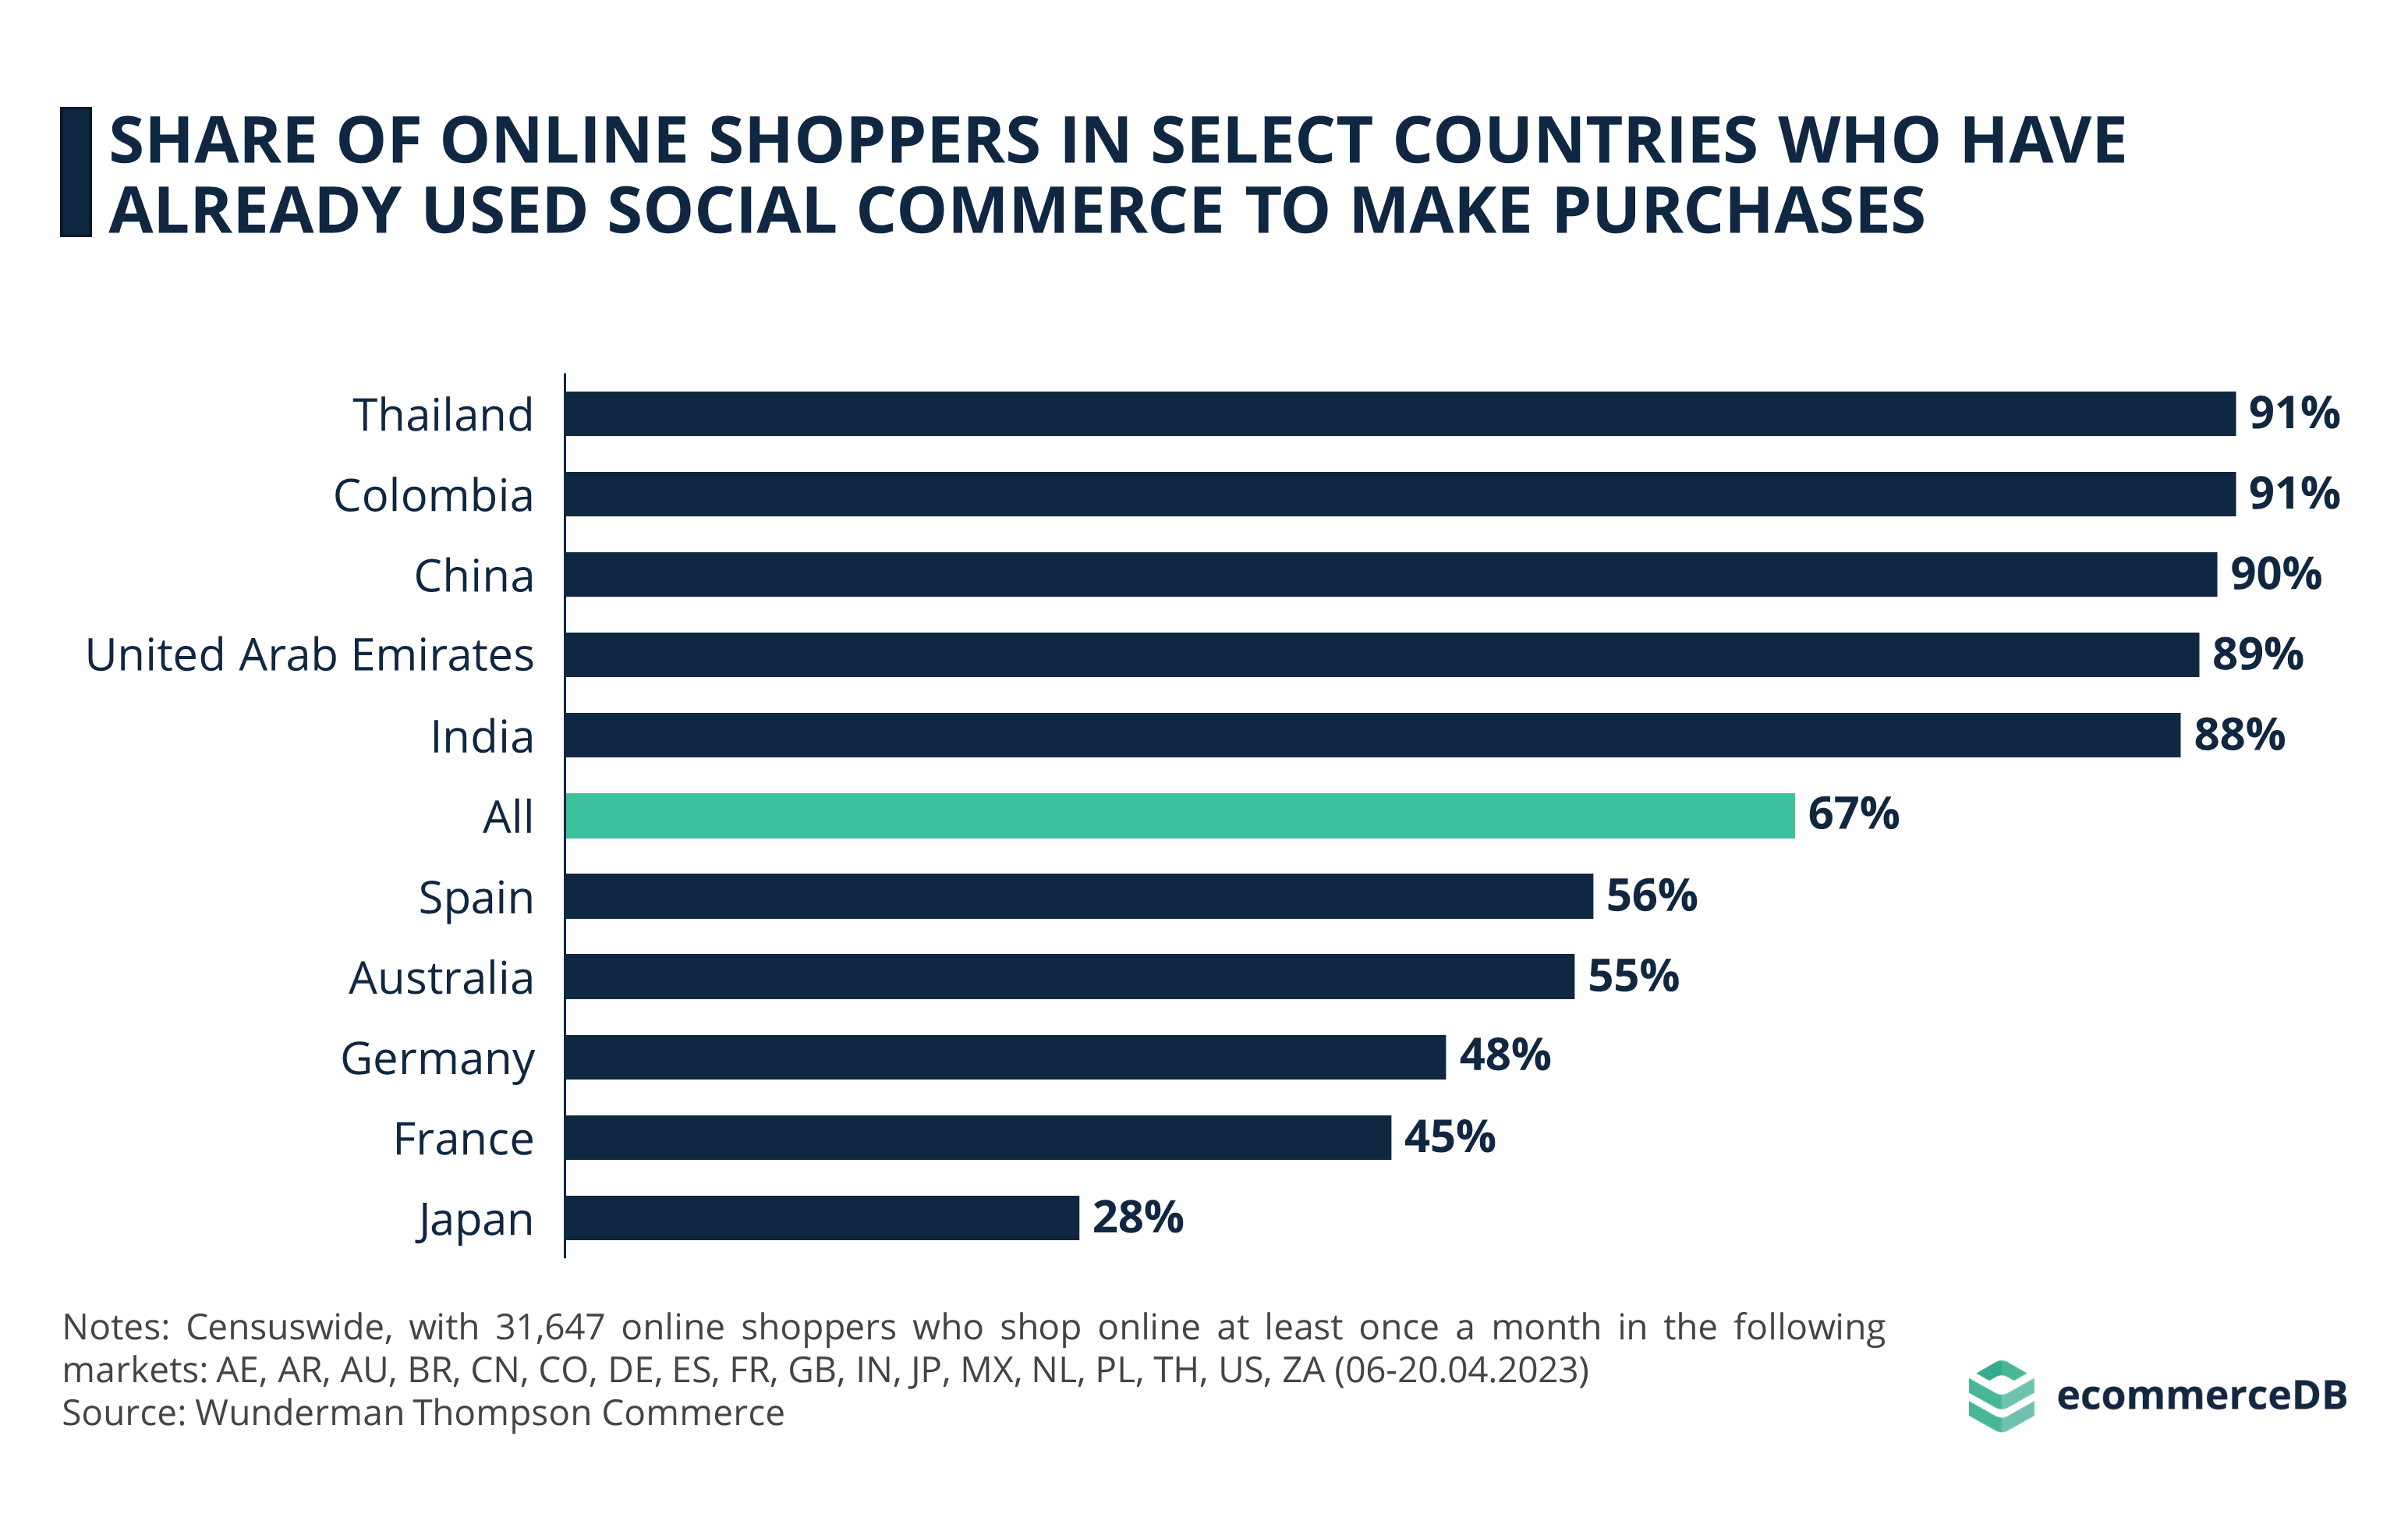 SHARE OF ONLINE SHOPPERS IN SELECT COUNTRIES WHO HAVE ALREADY USED SOCIAL COMMERCE TO MAKE PURCHASES